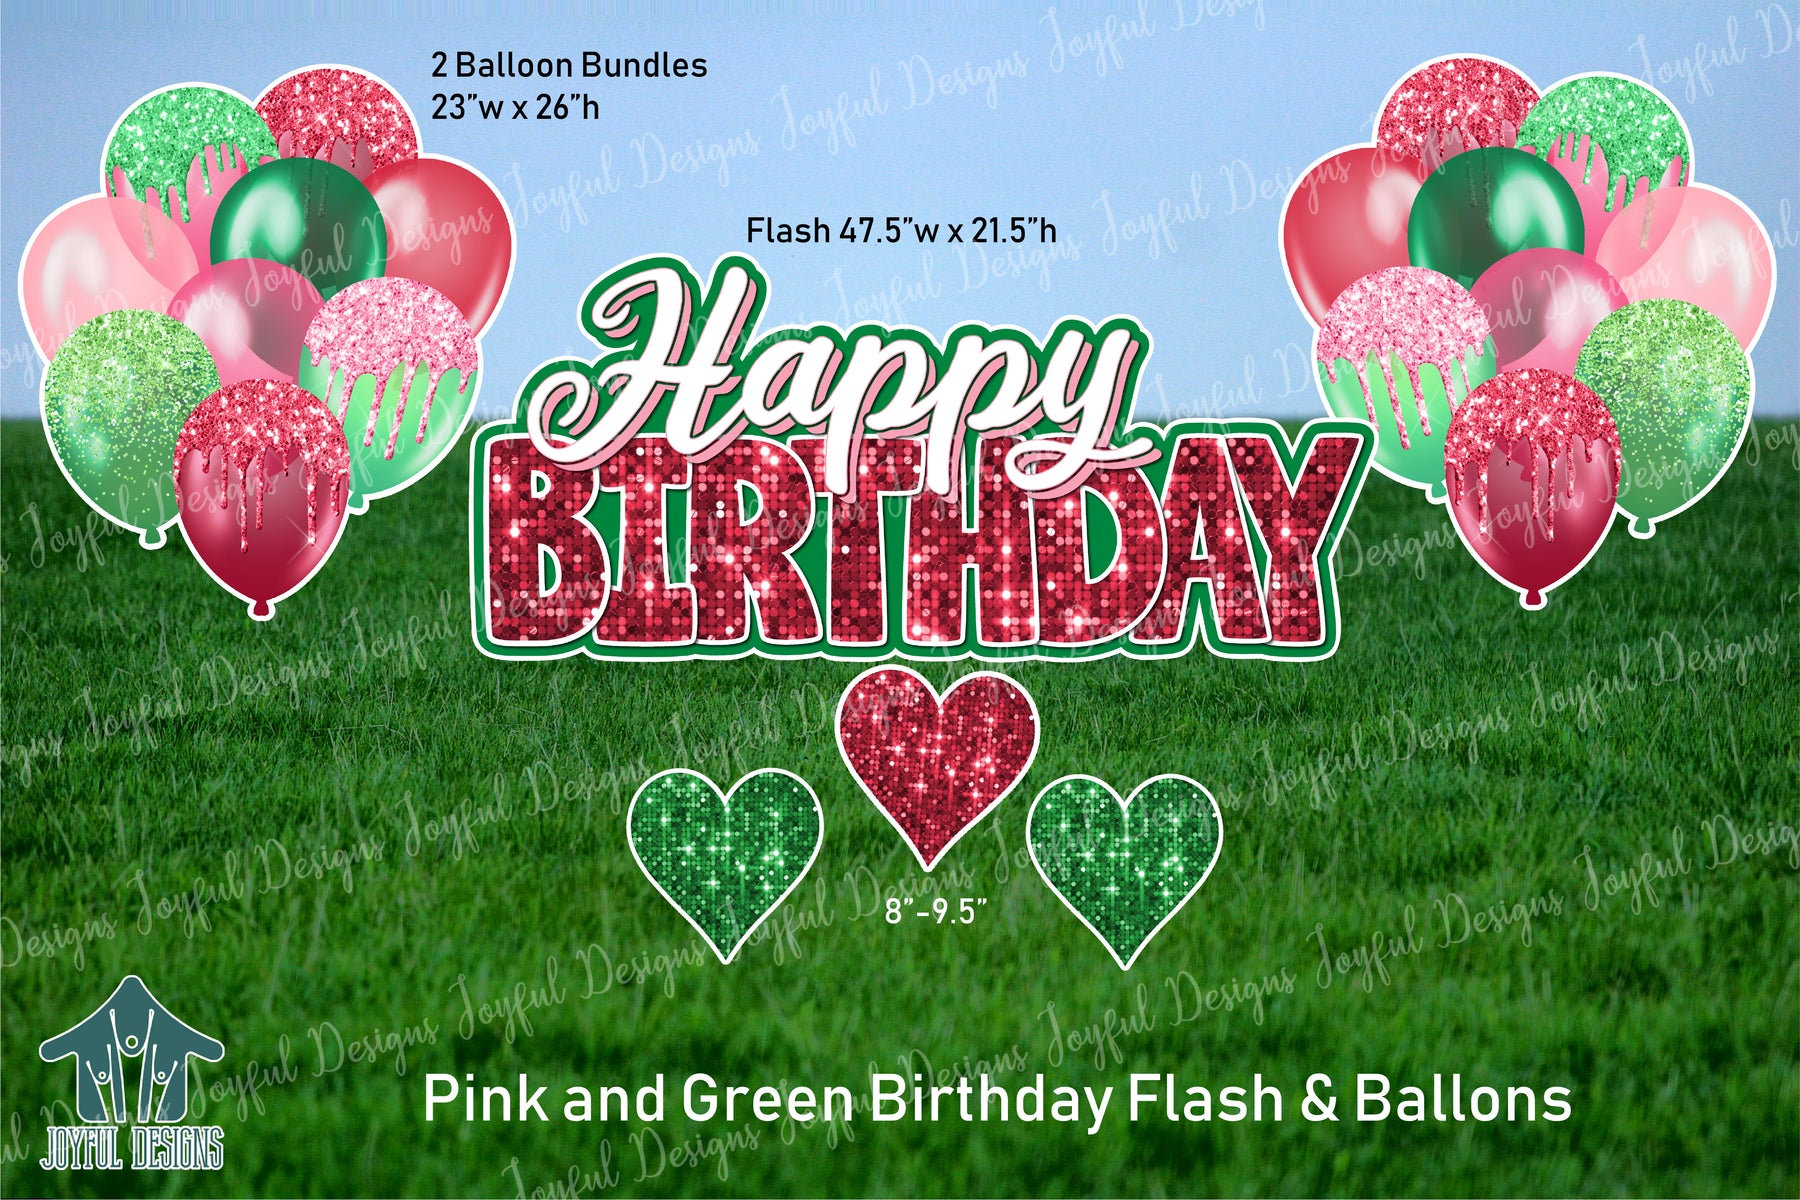 Pink and Green Birthday Centerpiece and Balloons